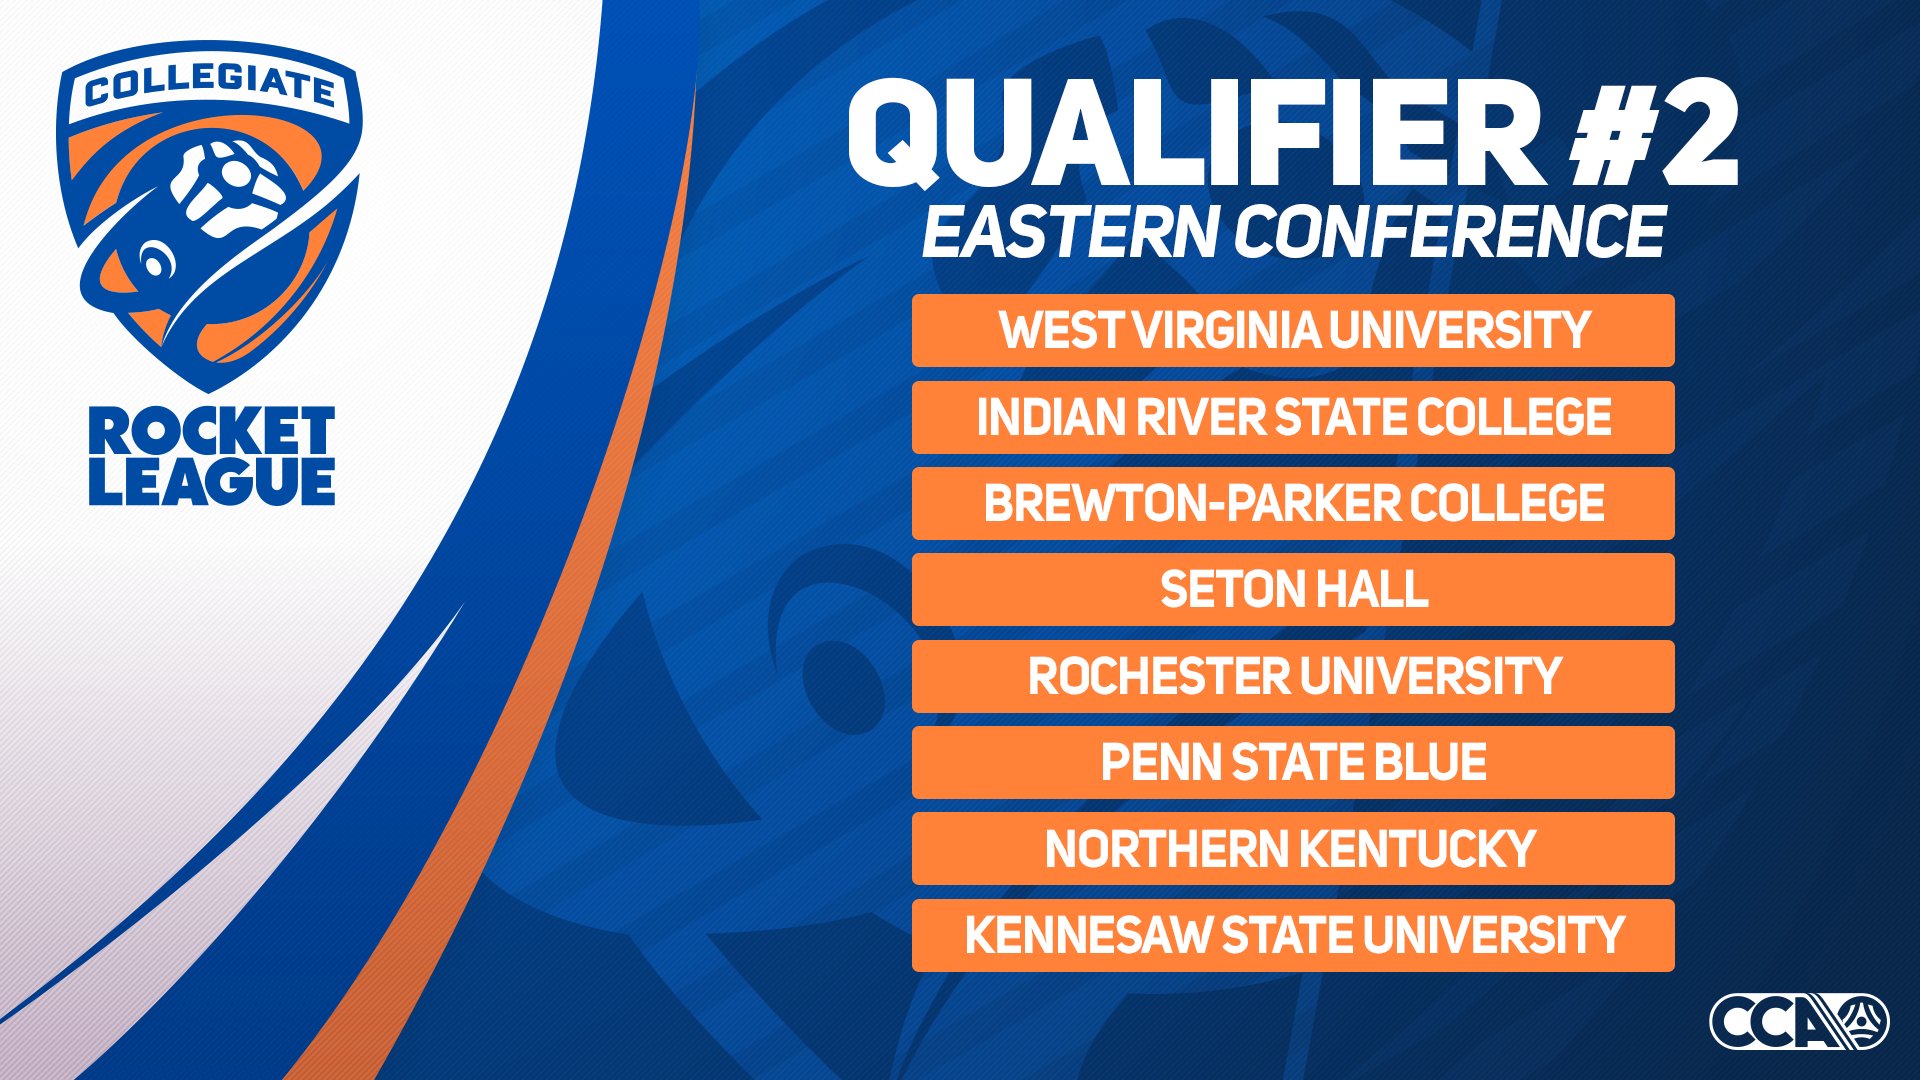 Qualifer #2 Eastern Conference Graphic